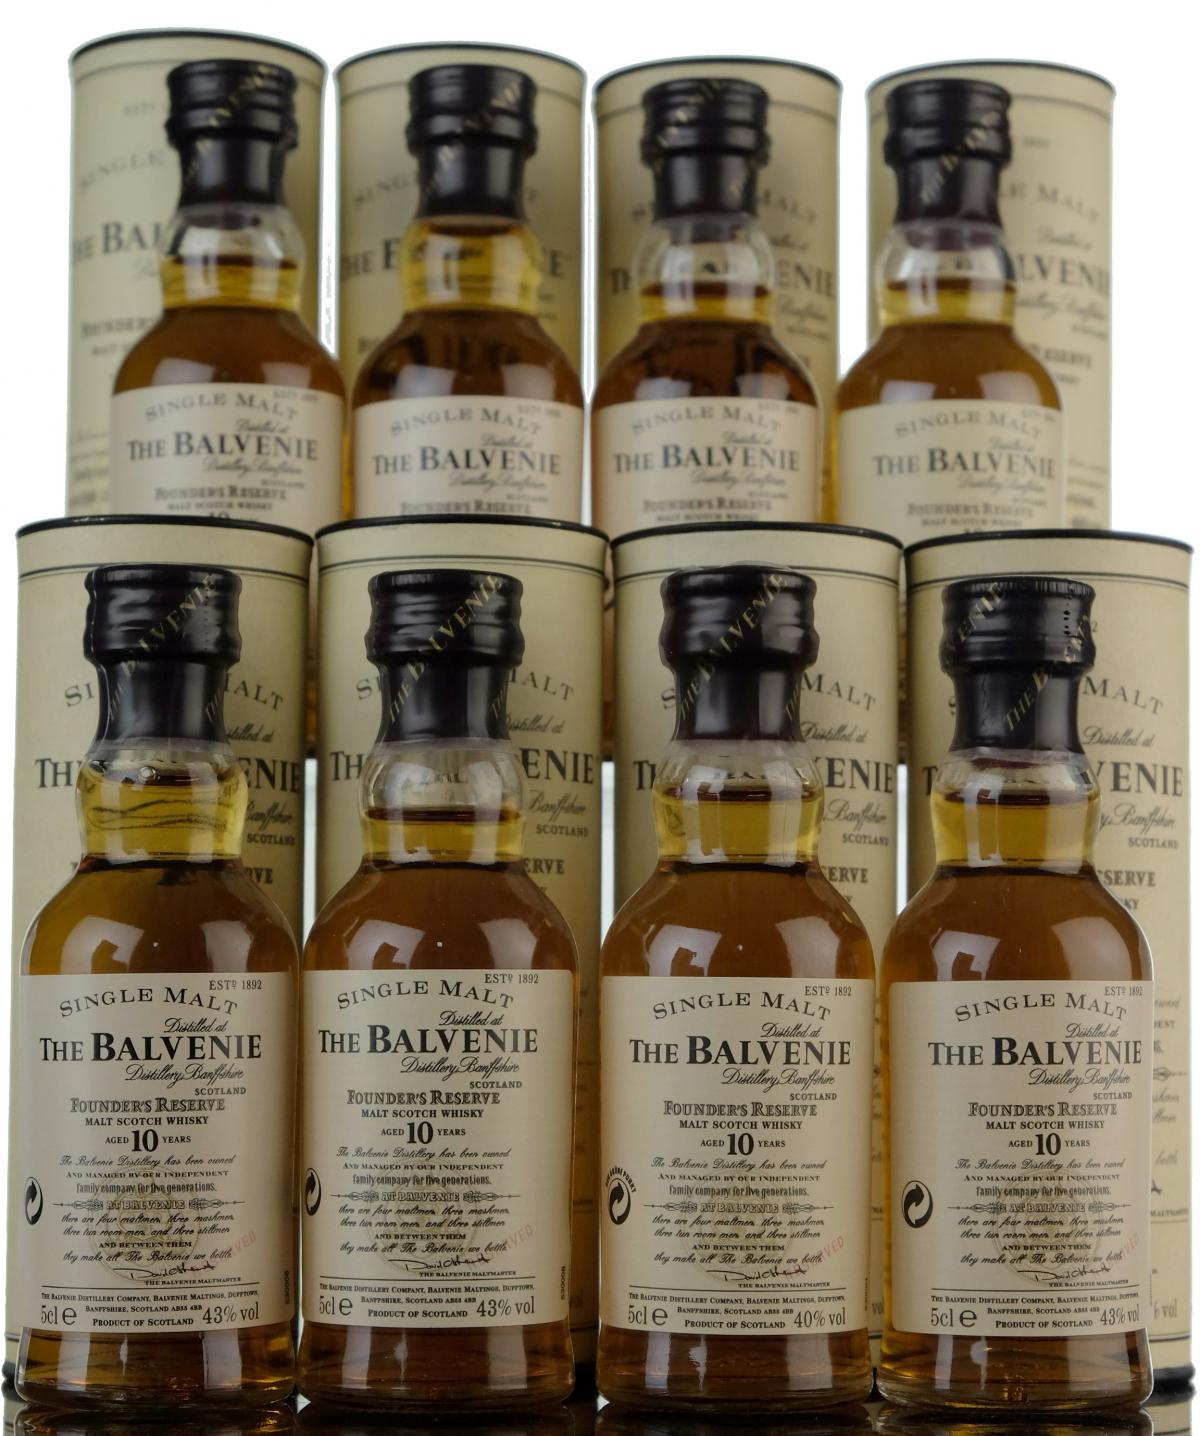 8 x Balvenie 10 Year Old - Founders Reserve Miniatures